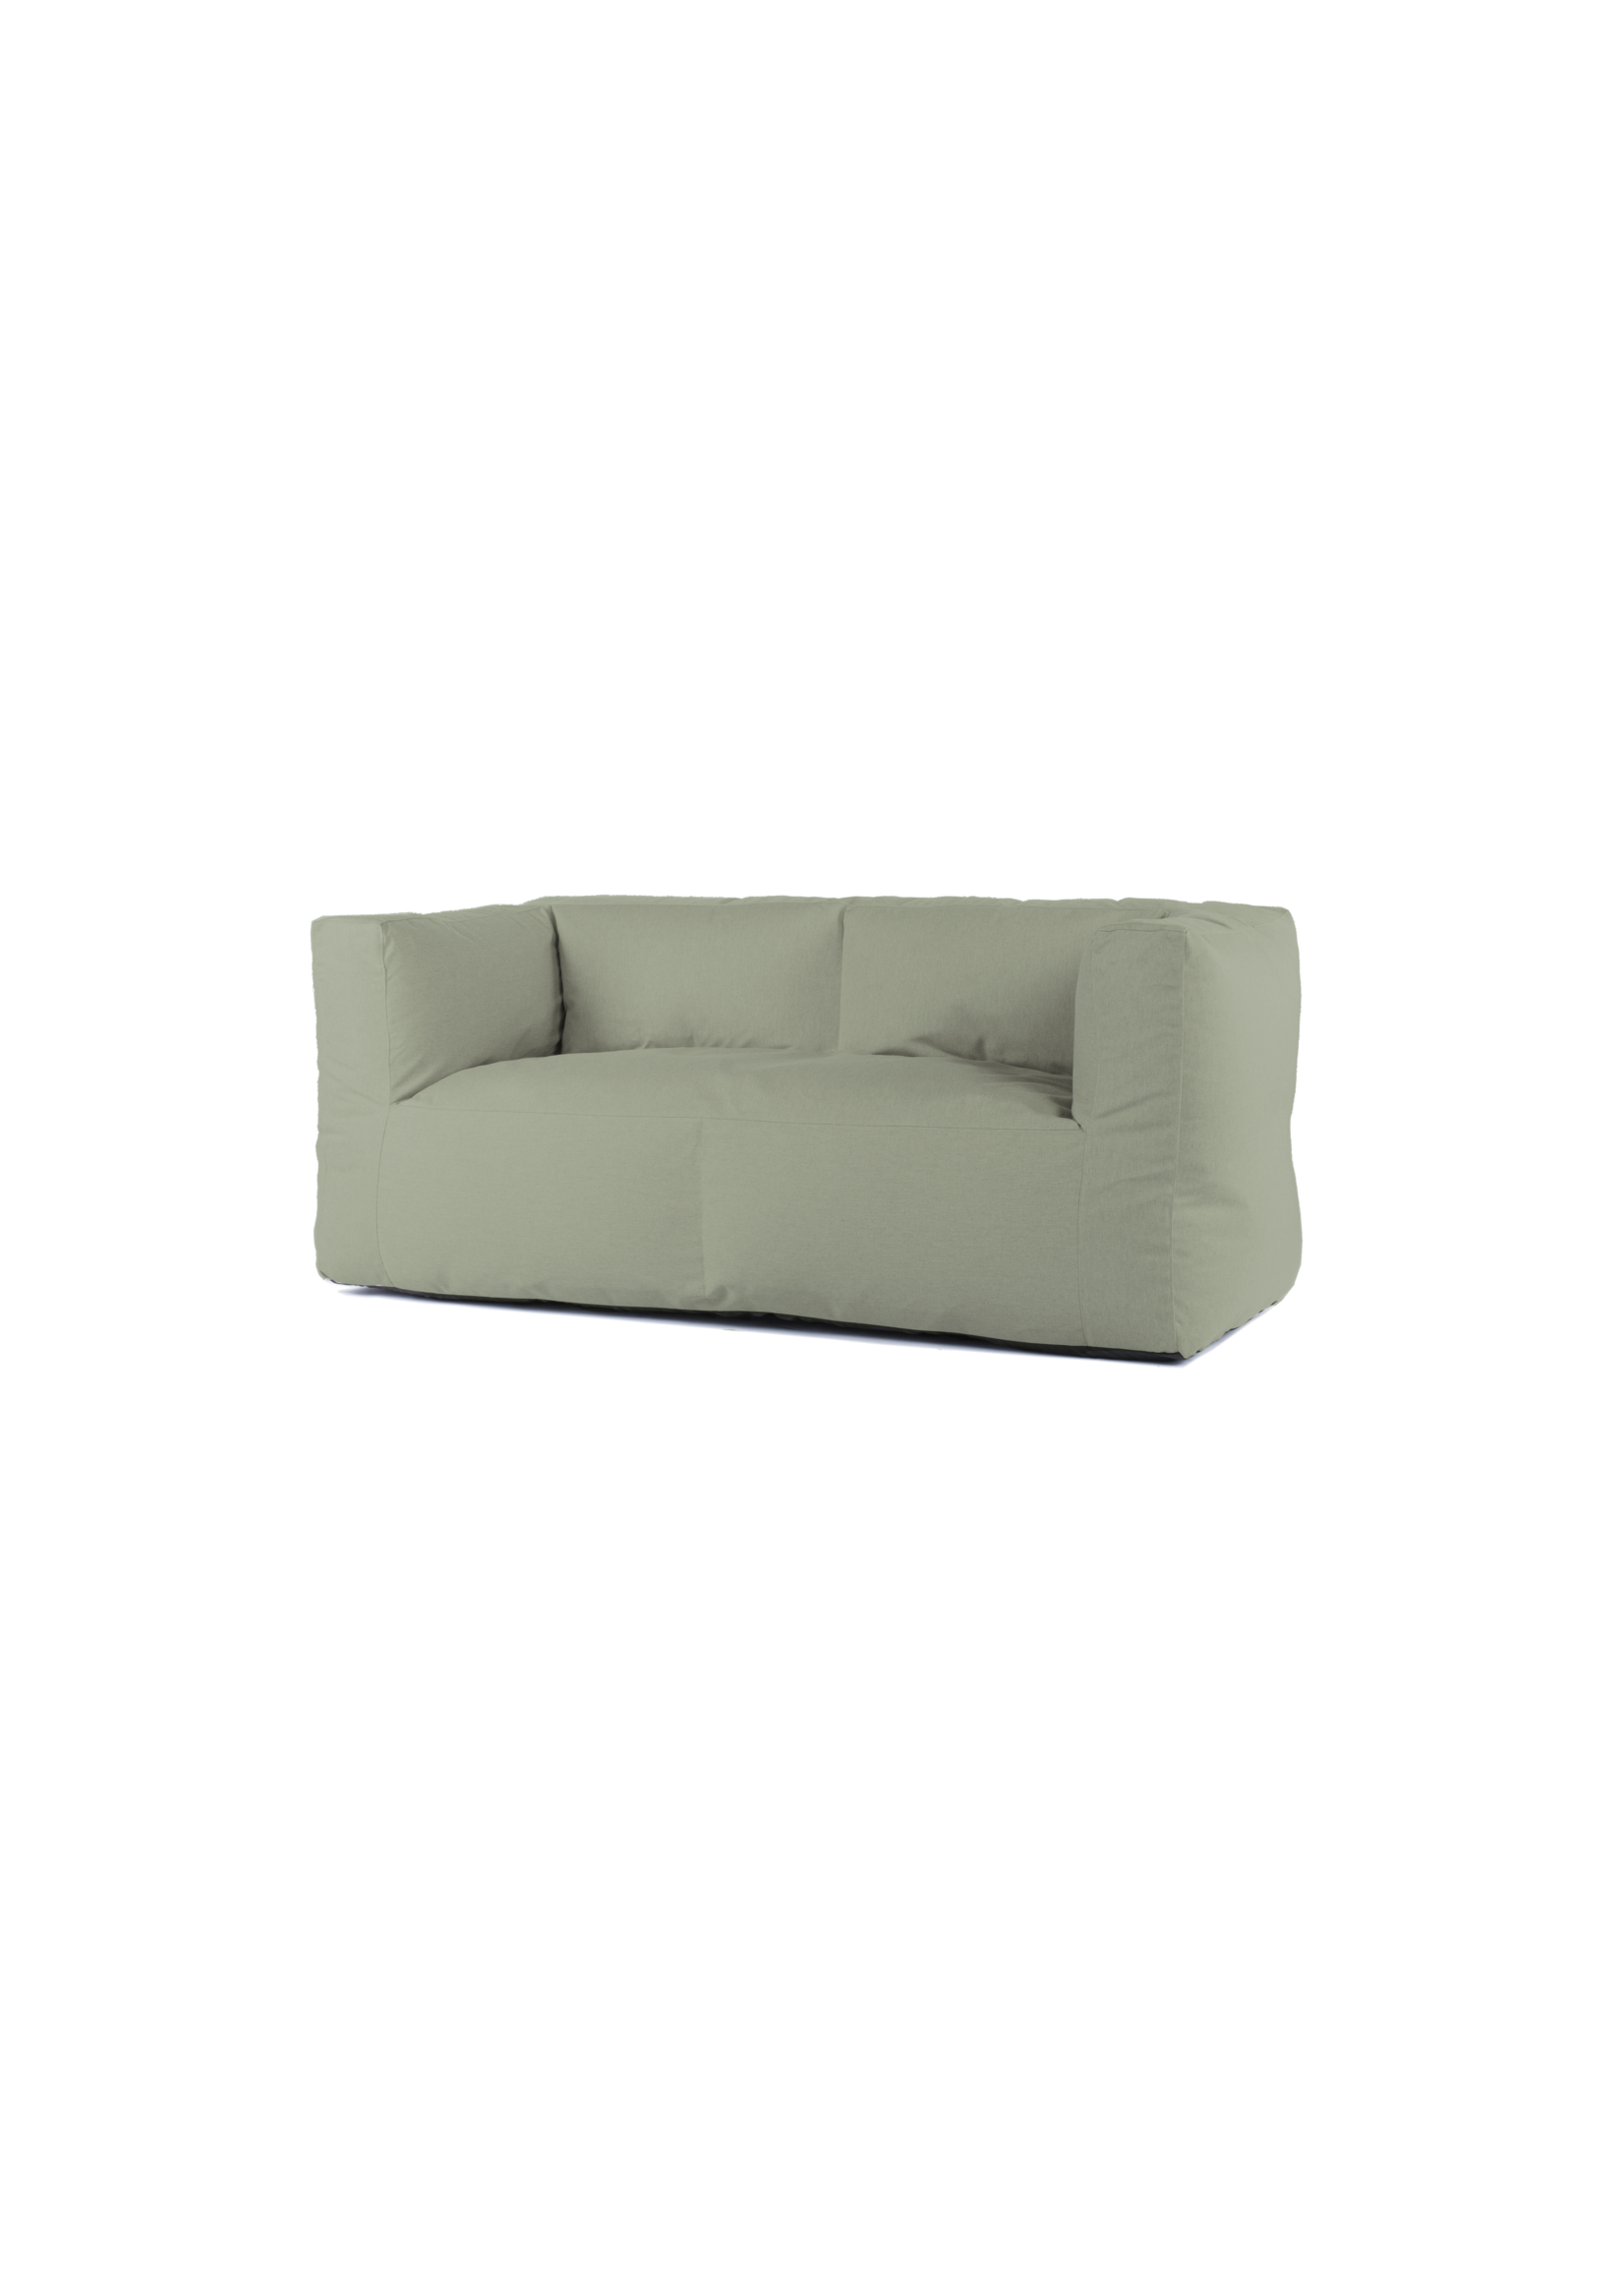 Bryck Bryck Couch | Two seat | ECOLLECTION